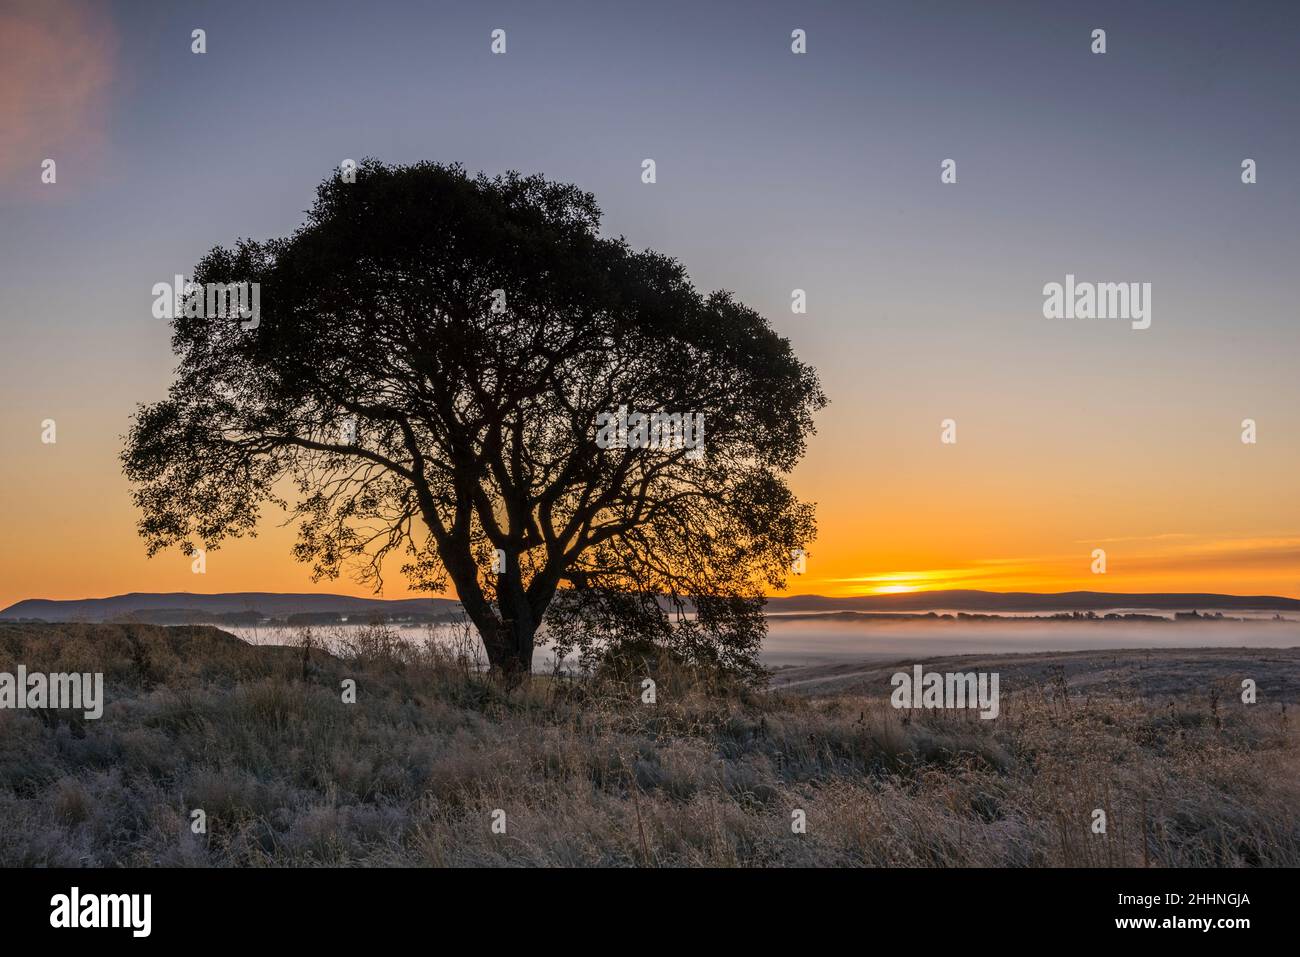 Atmospheric early morning picture of tree in field with distant cloud inversion. Stock Photo